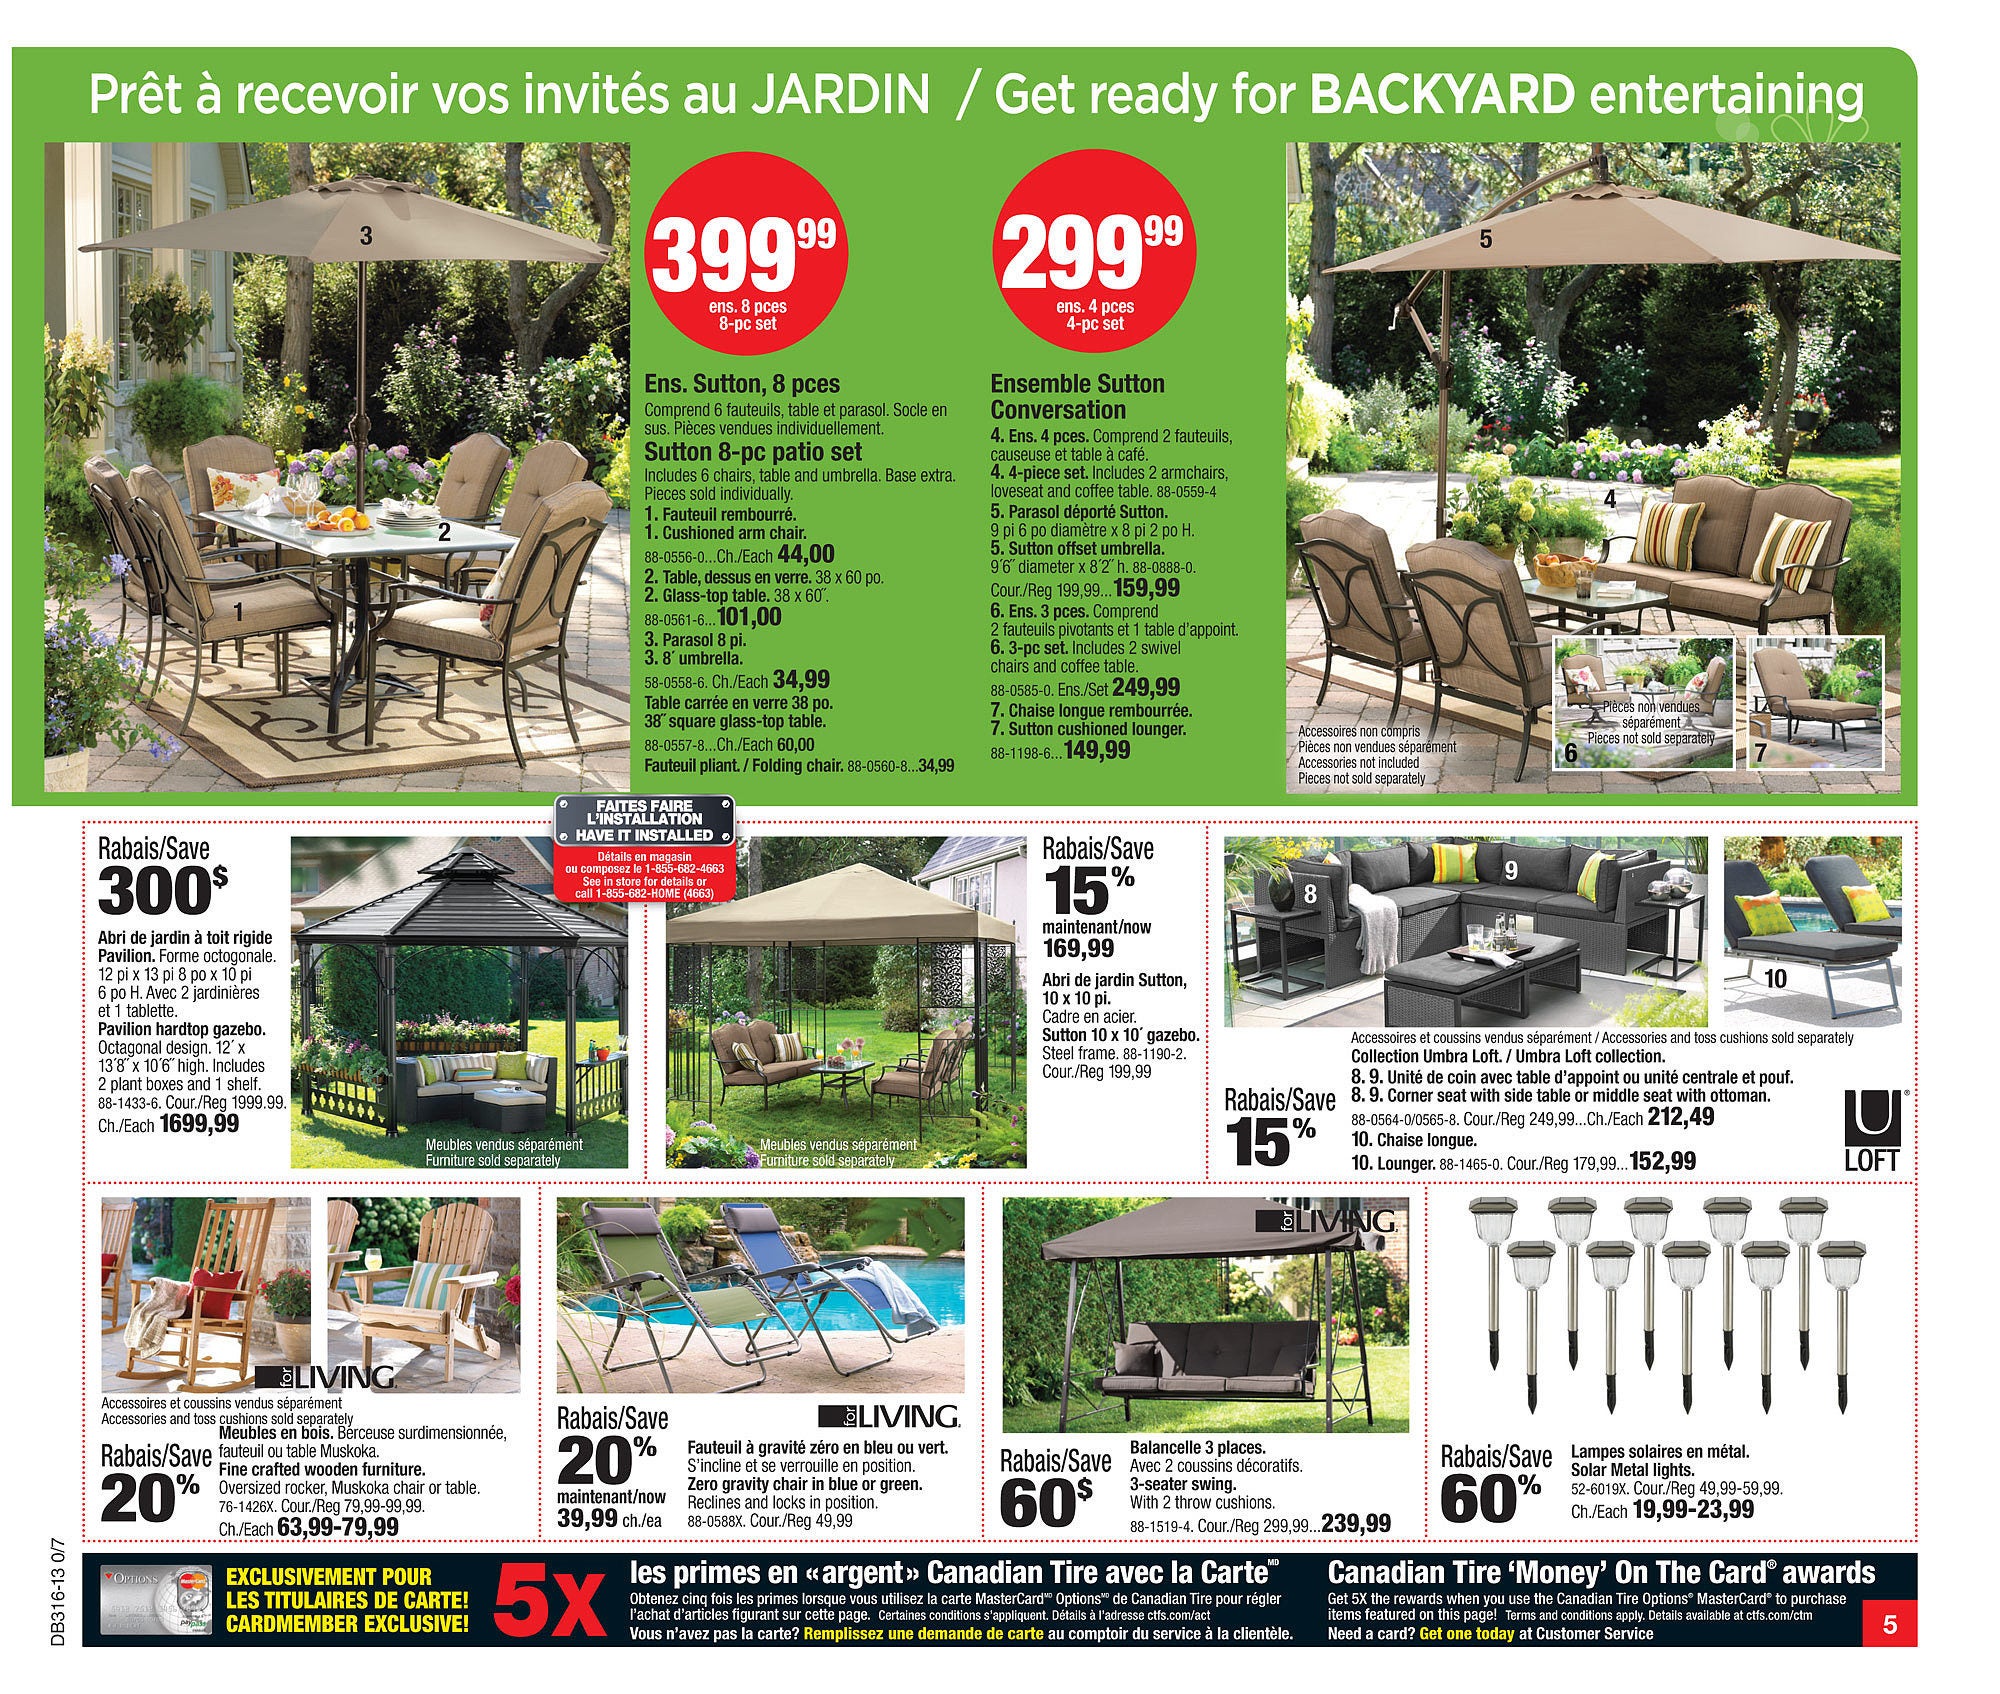 Canadian Tire Weekly Flyer Weekly Flyer Apr 11 18